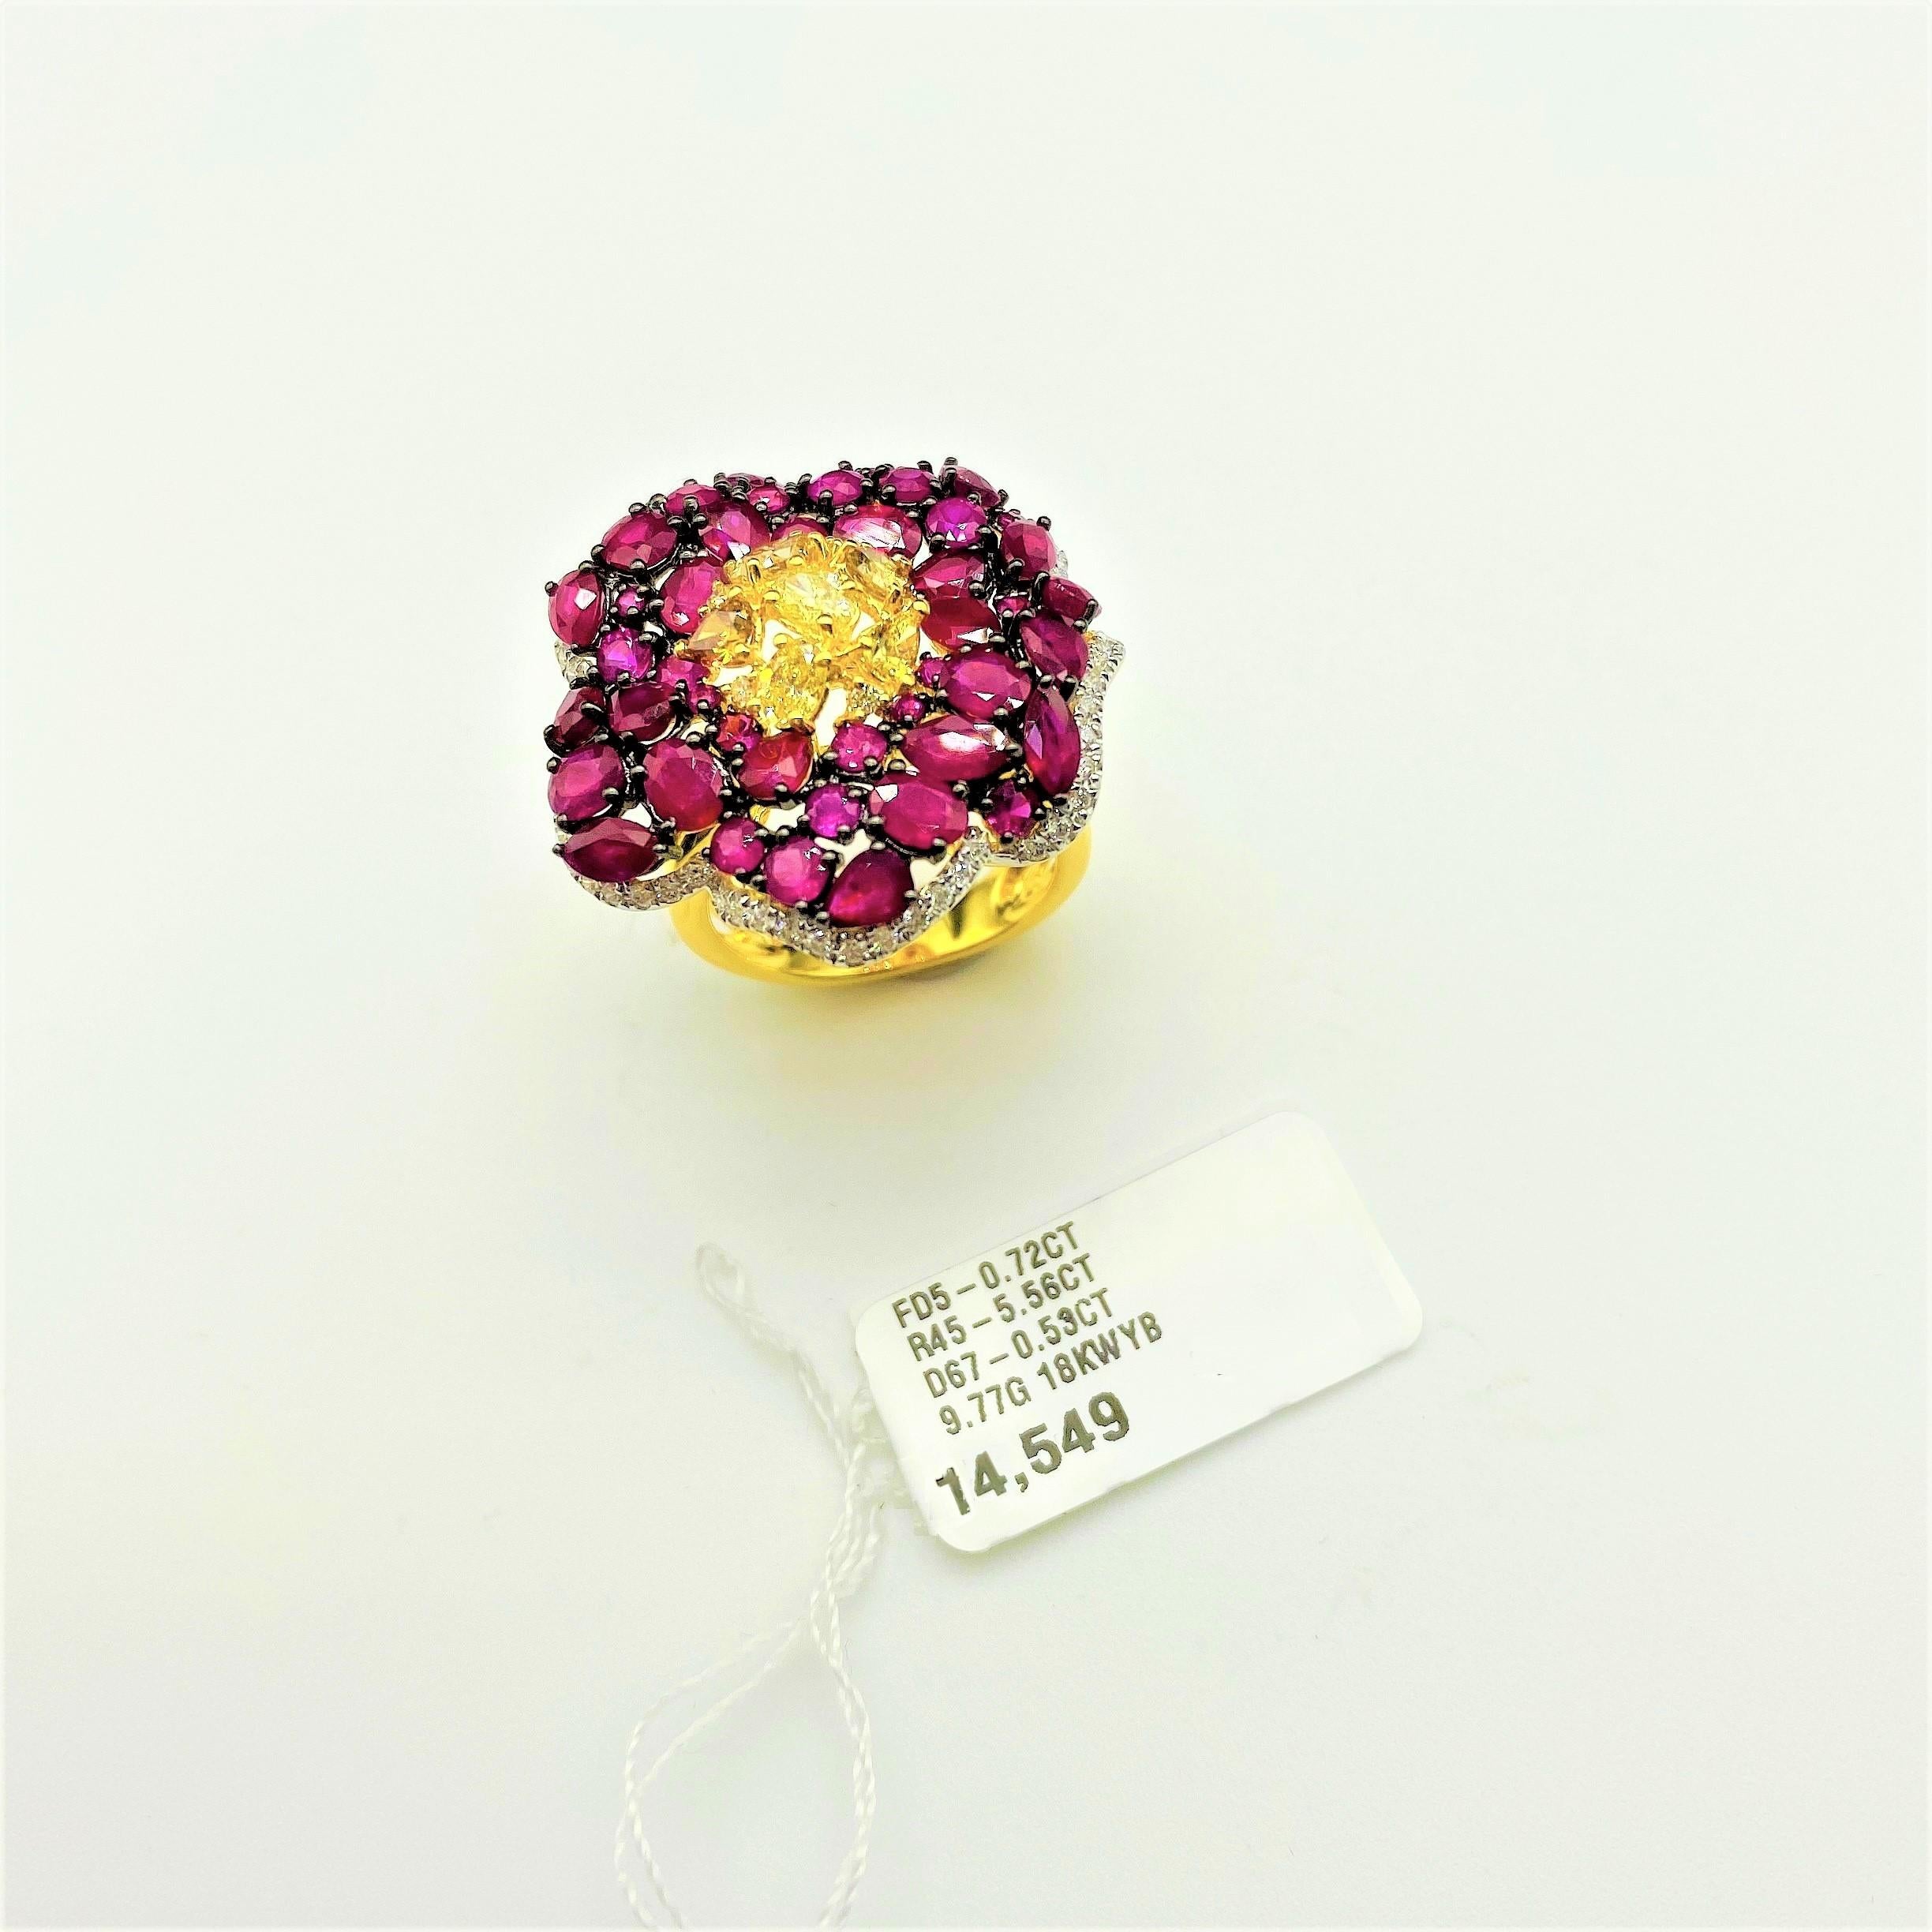 NWT $14, 549 18kt Gold Gorgeous 7ct Fancy Ruby Yellow Diamond Floral Flower Ring In New Condition For Sale In New York, NY